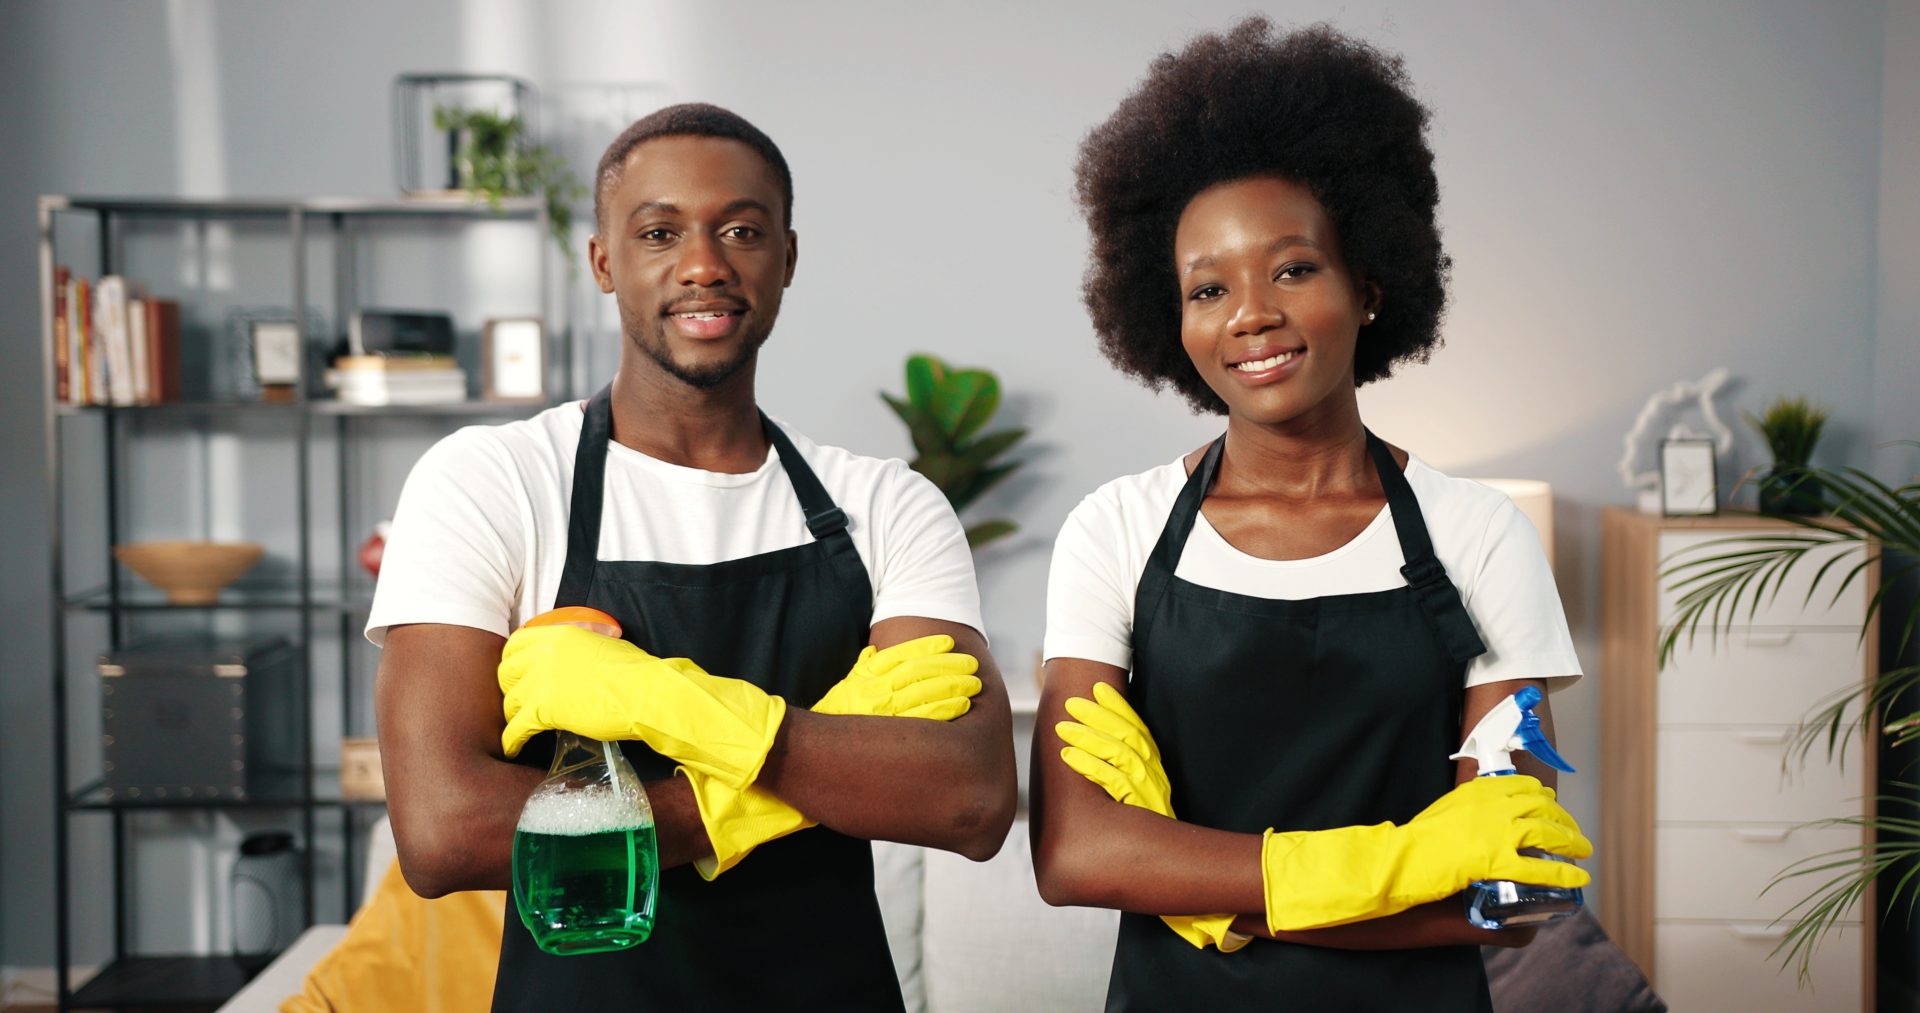 House cleaners have cleaning tools in their hands